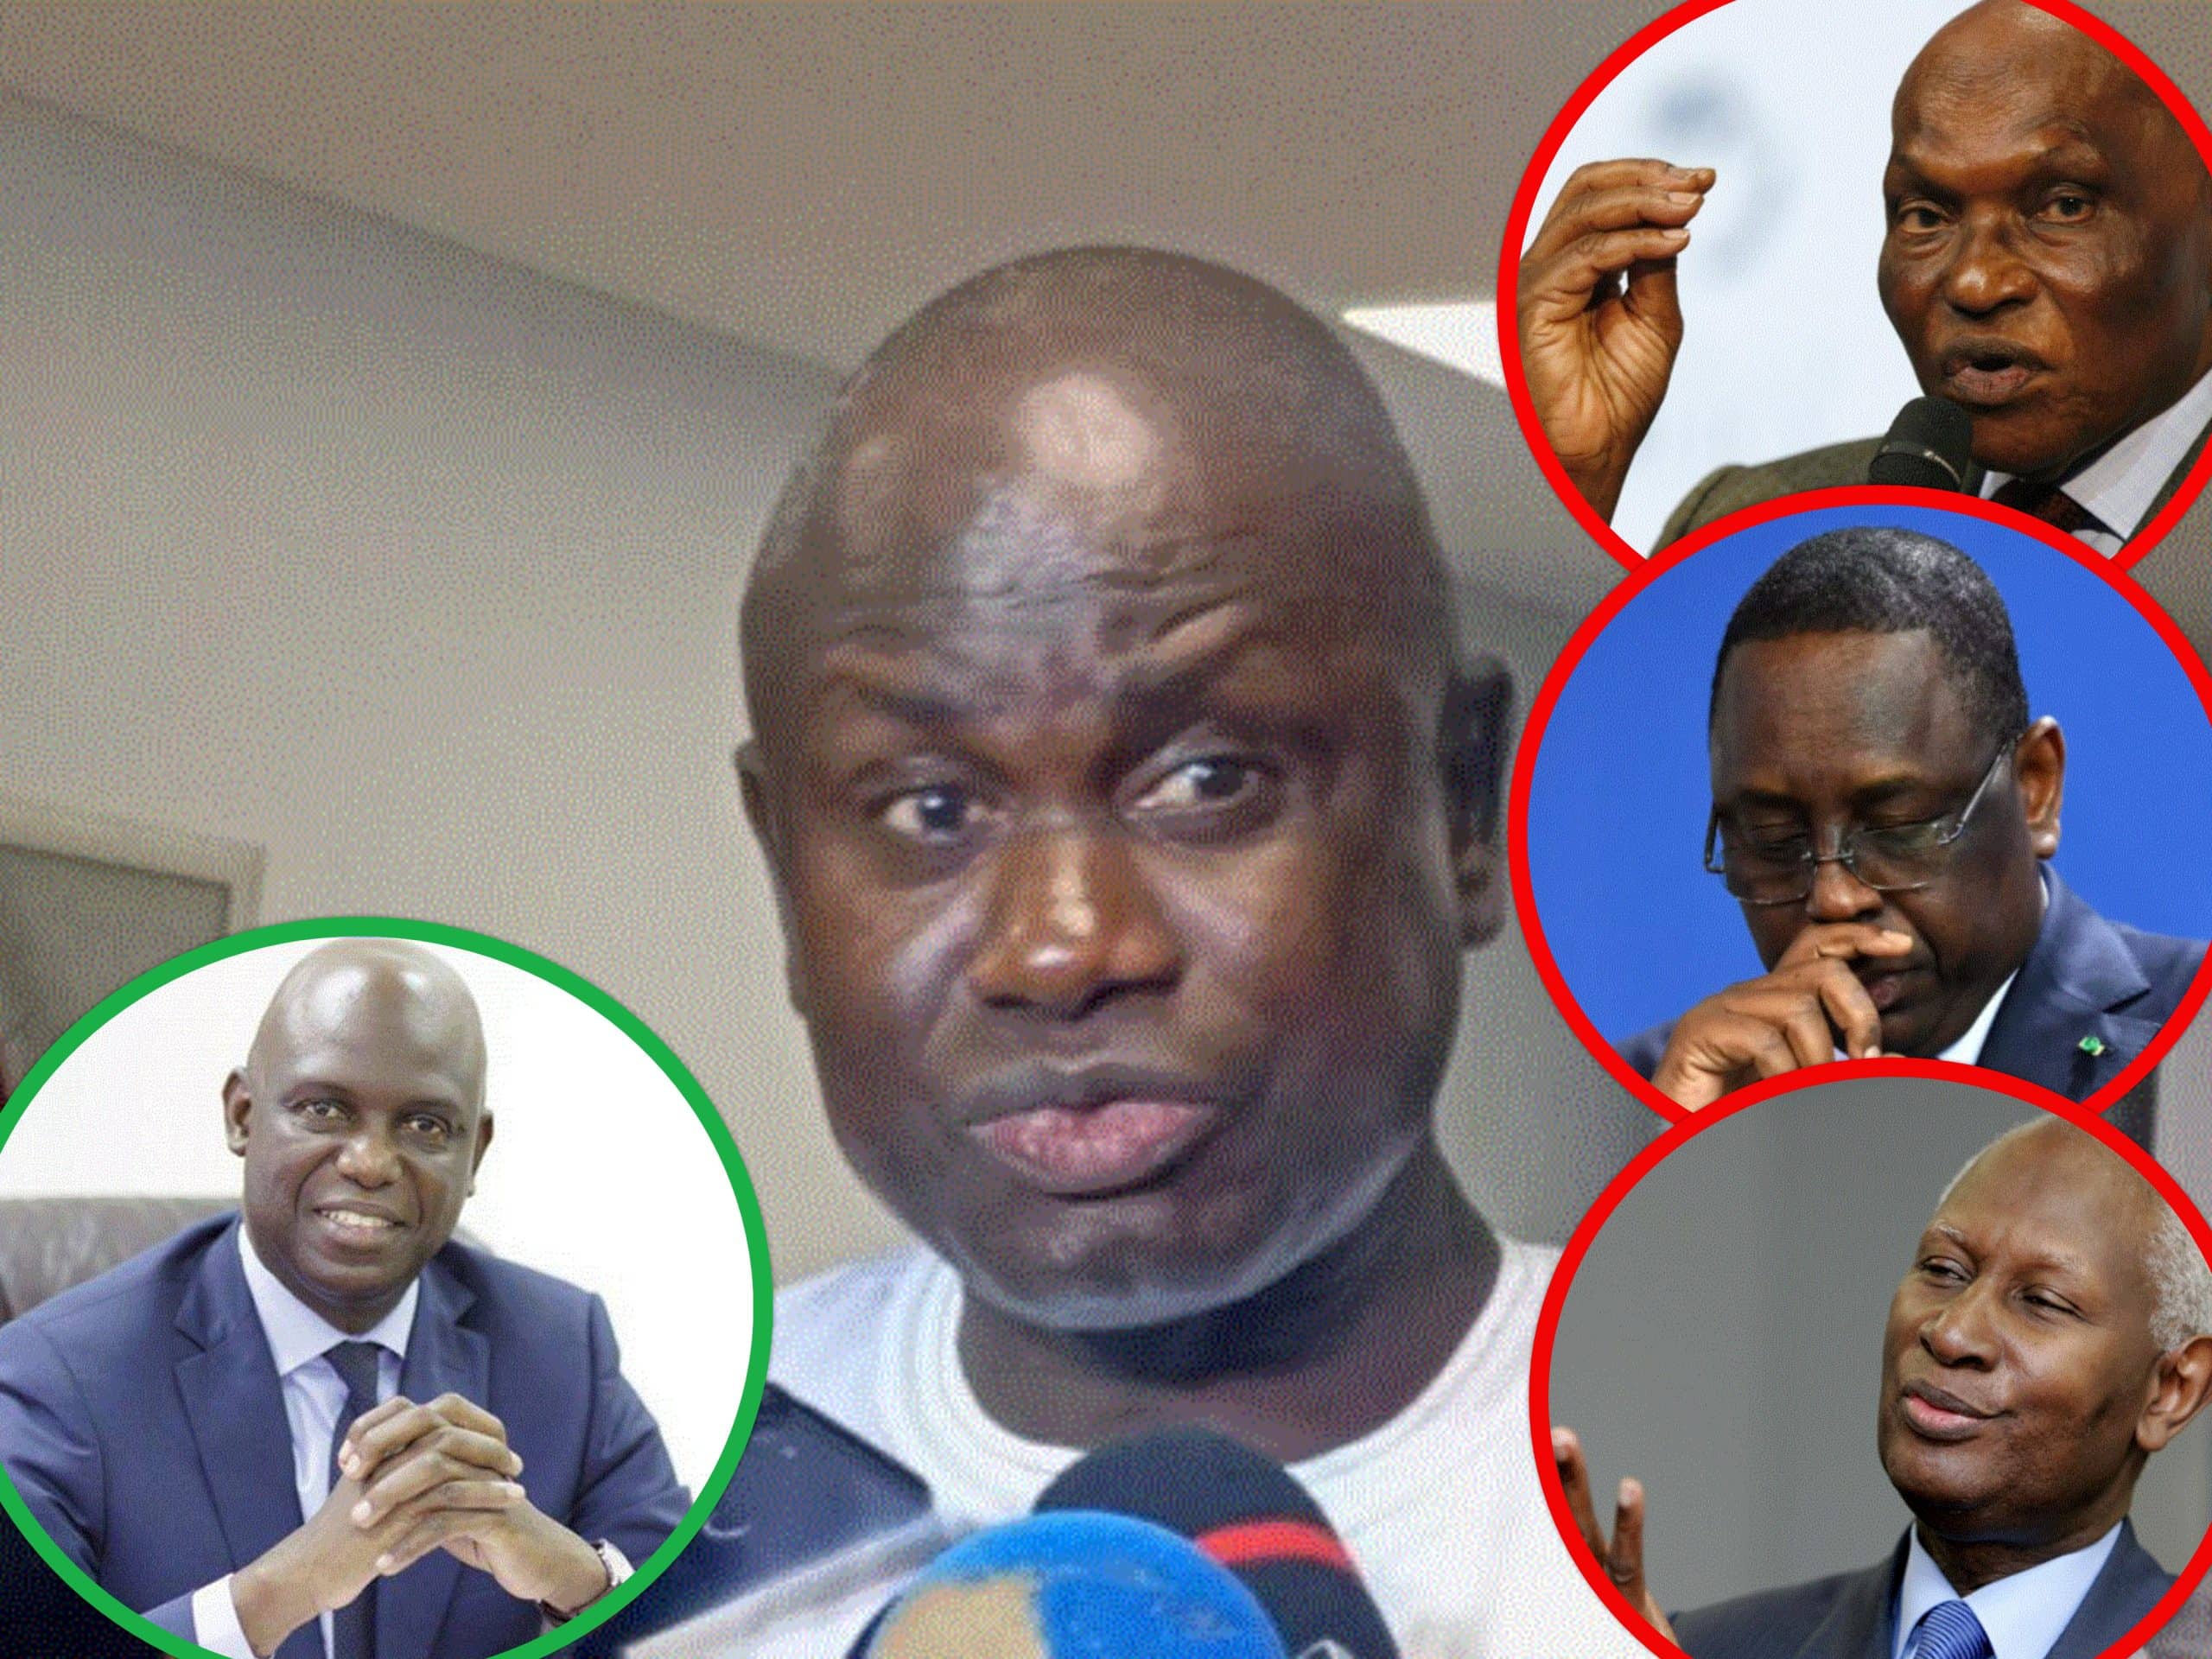 Accidents : Seydi Gassama dédouane Mansour Faye et accable Diouf, Wade et Macky Sall